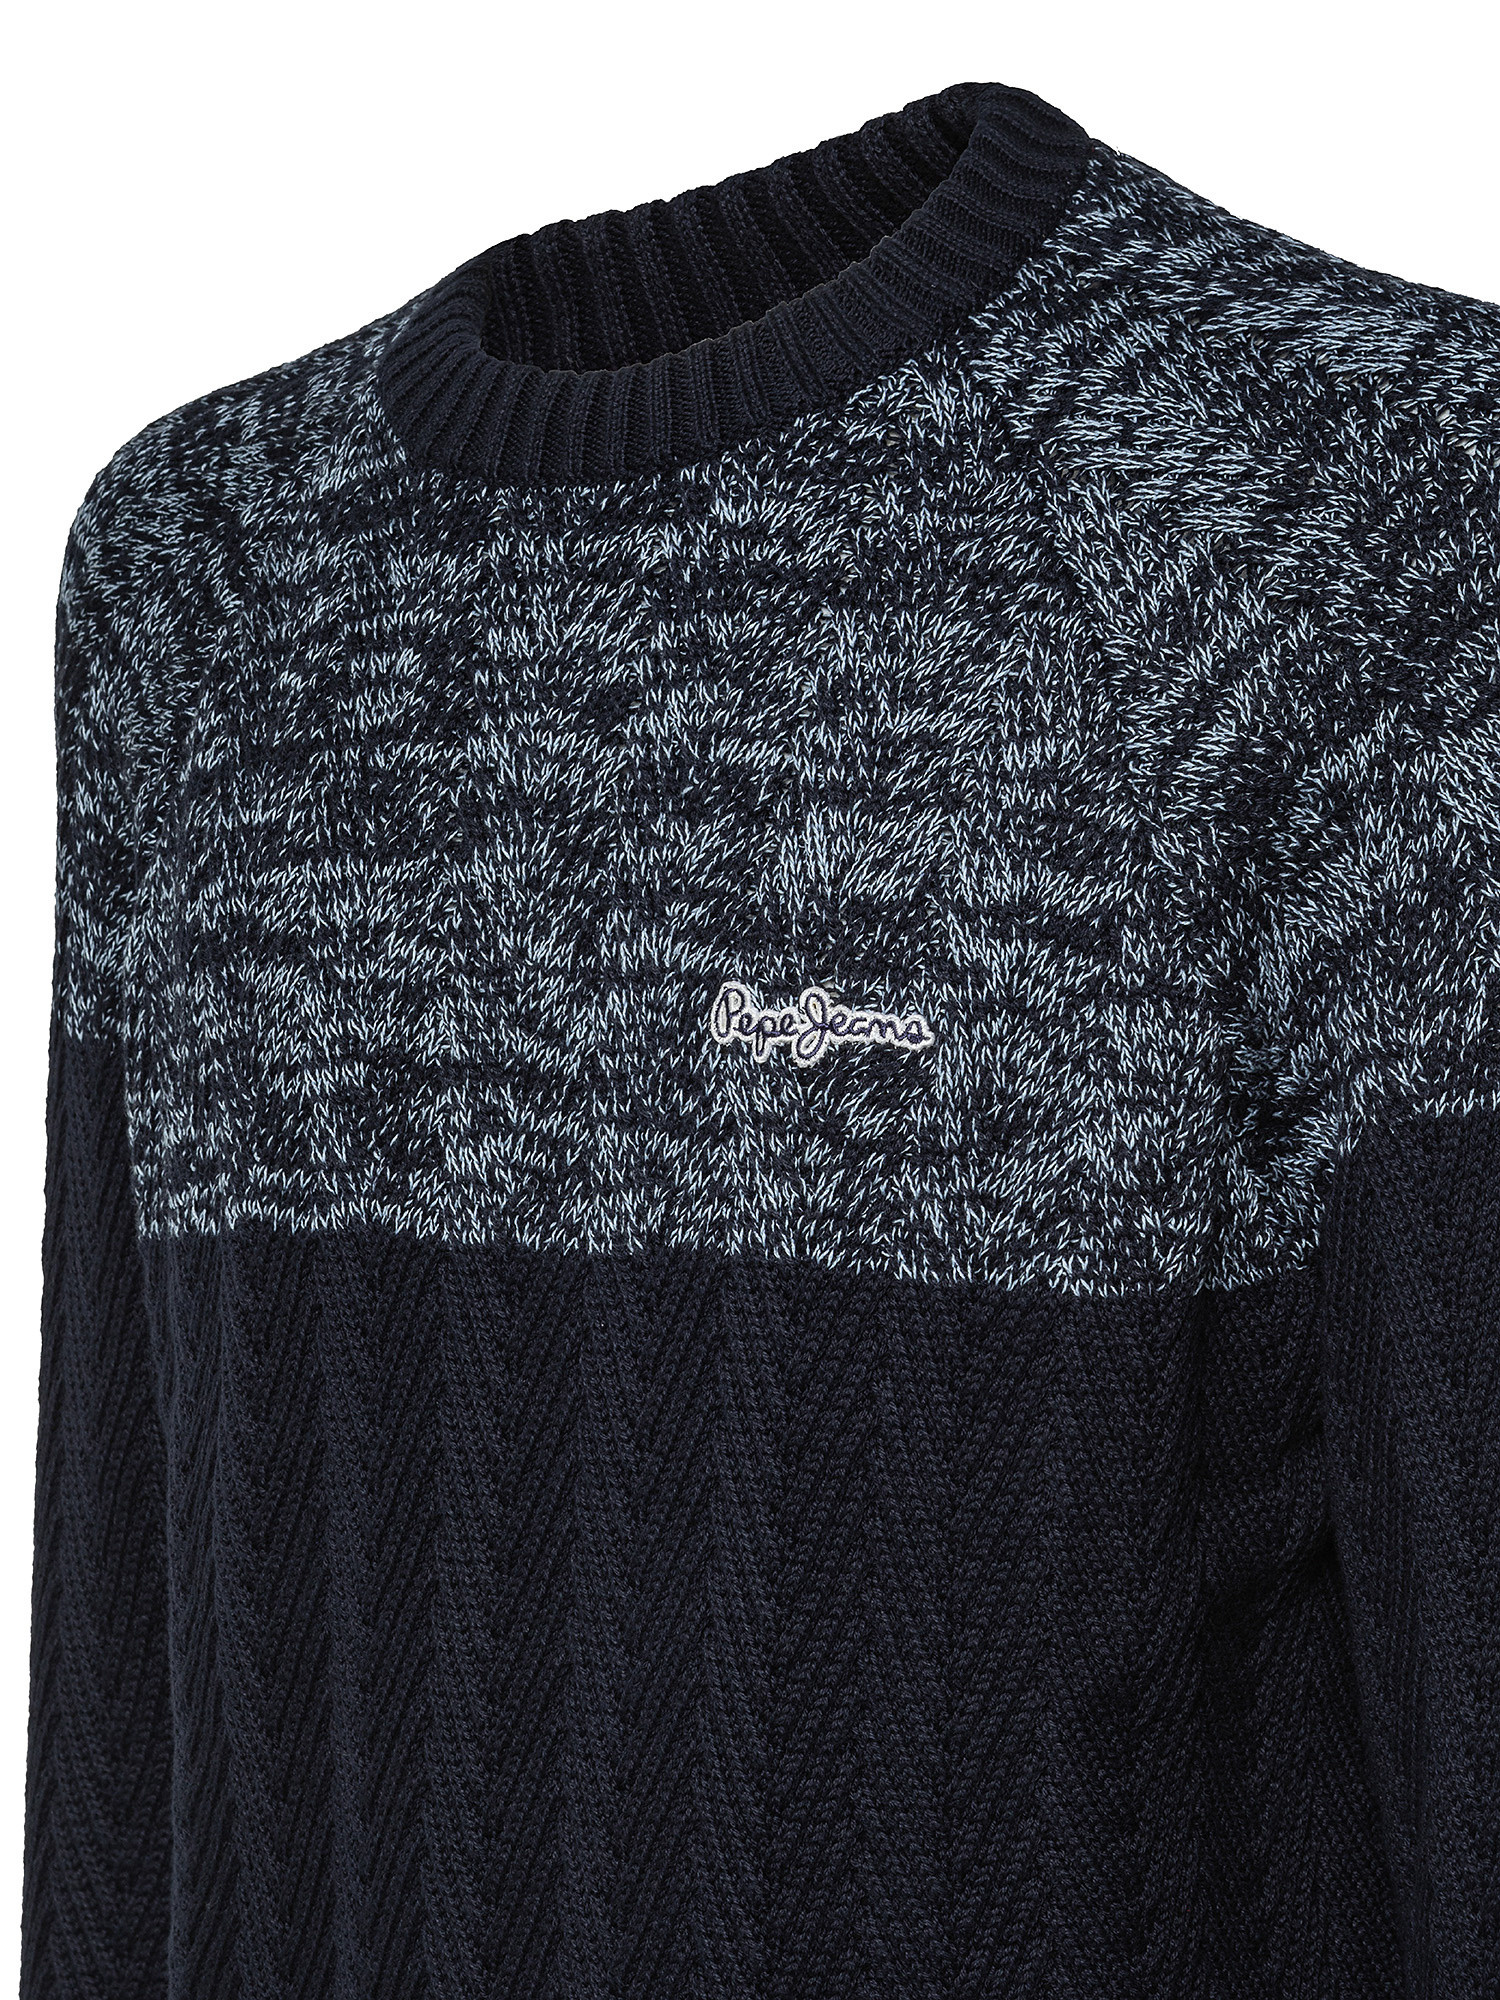 Sweater with logo, Dark Blue, large image number 2